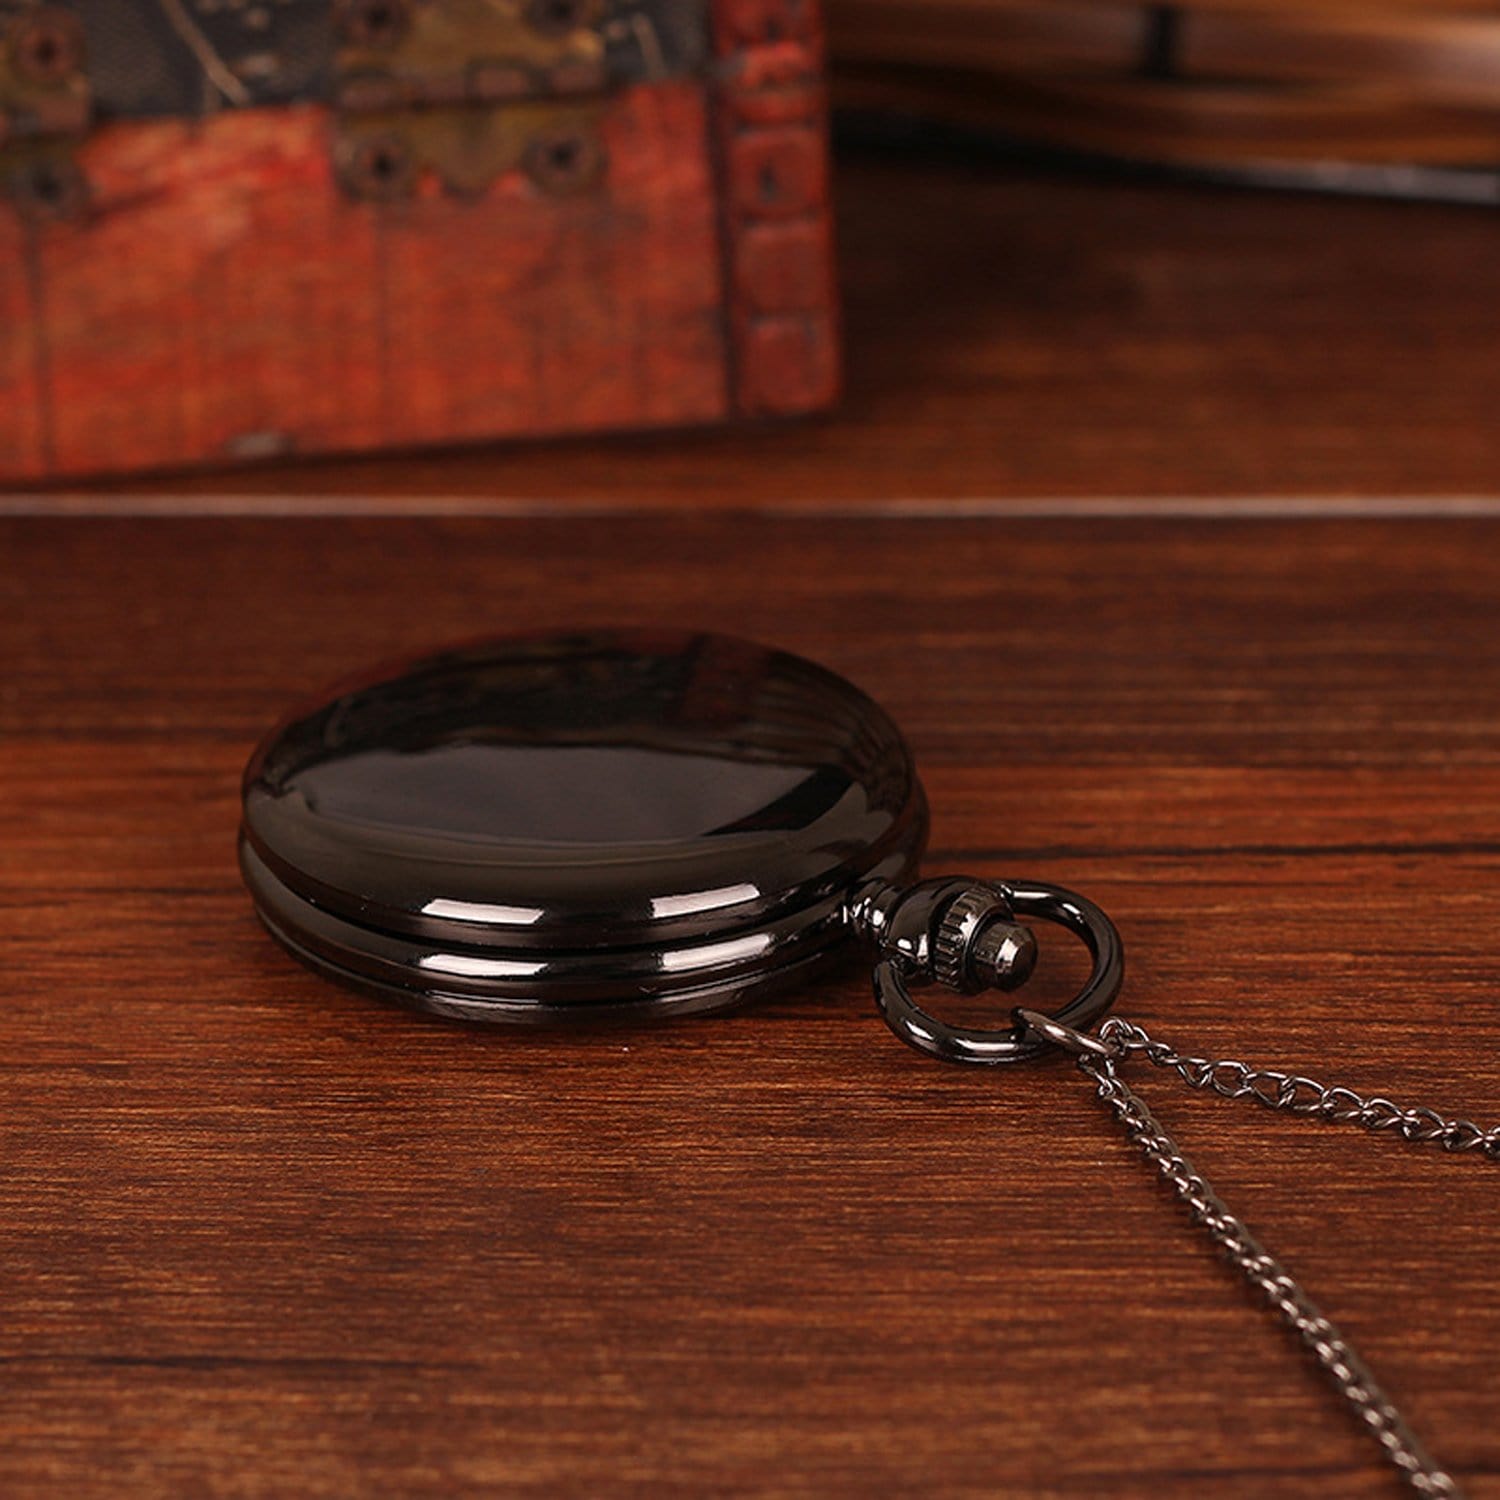 Pocket Watches To My Boyfriend - I Do Believe In Fate And Destiny Pocket Watch GiveMe-Gifts